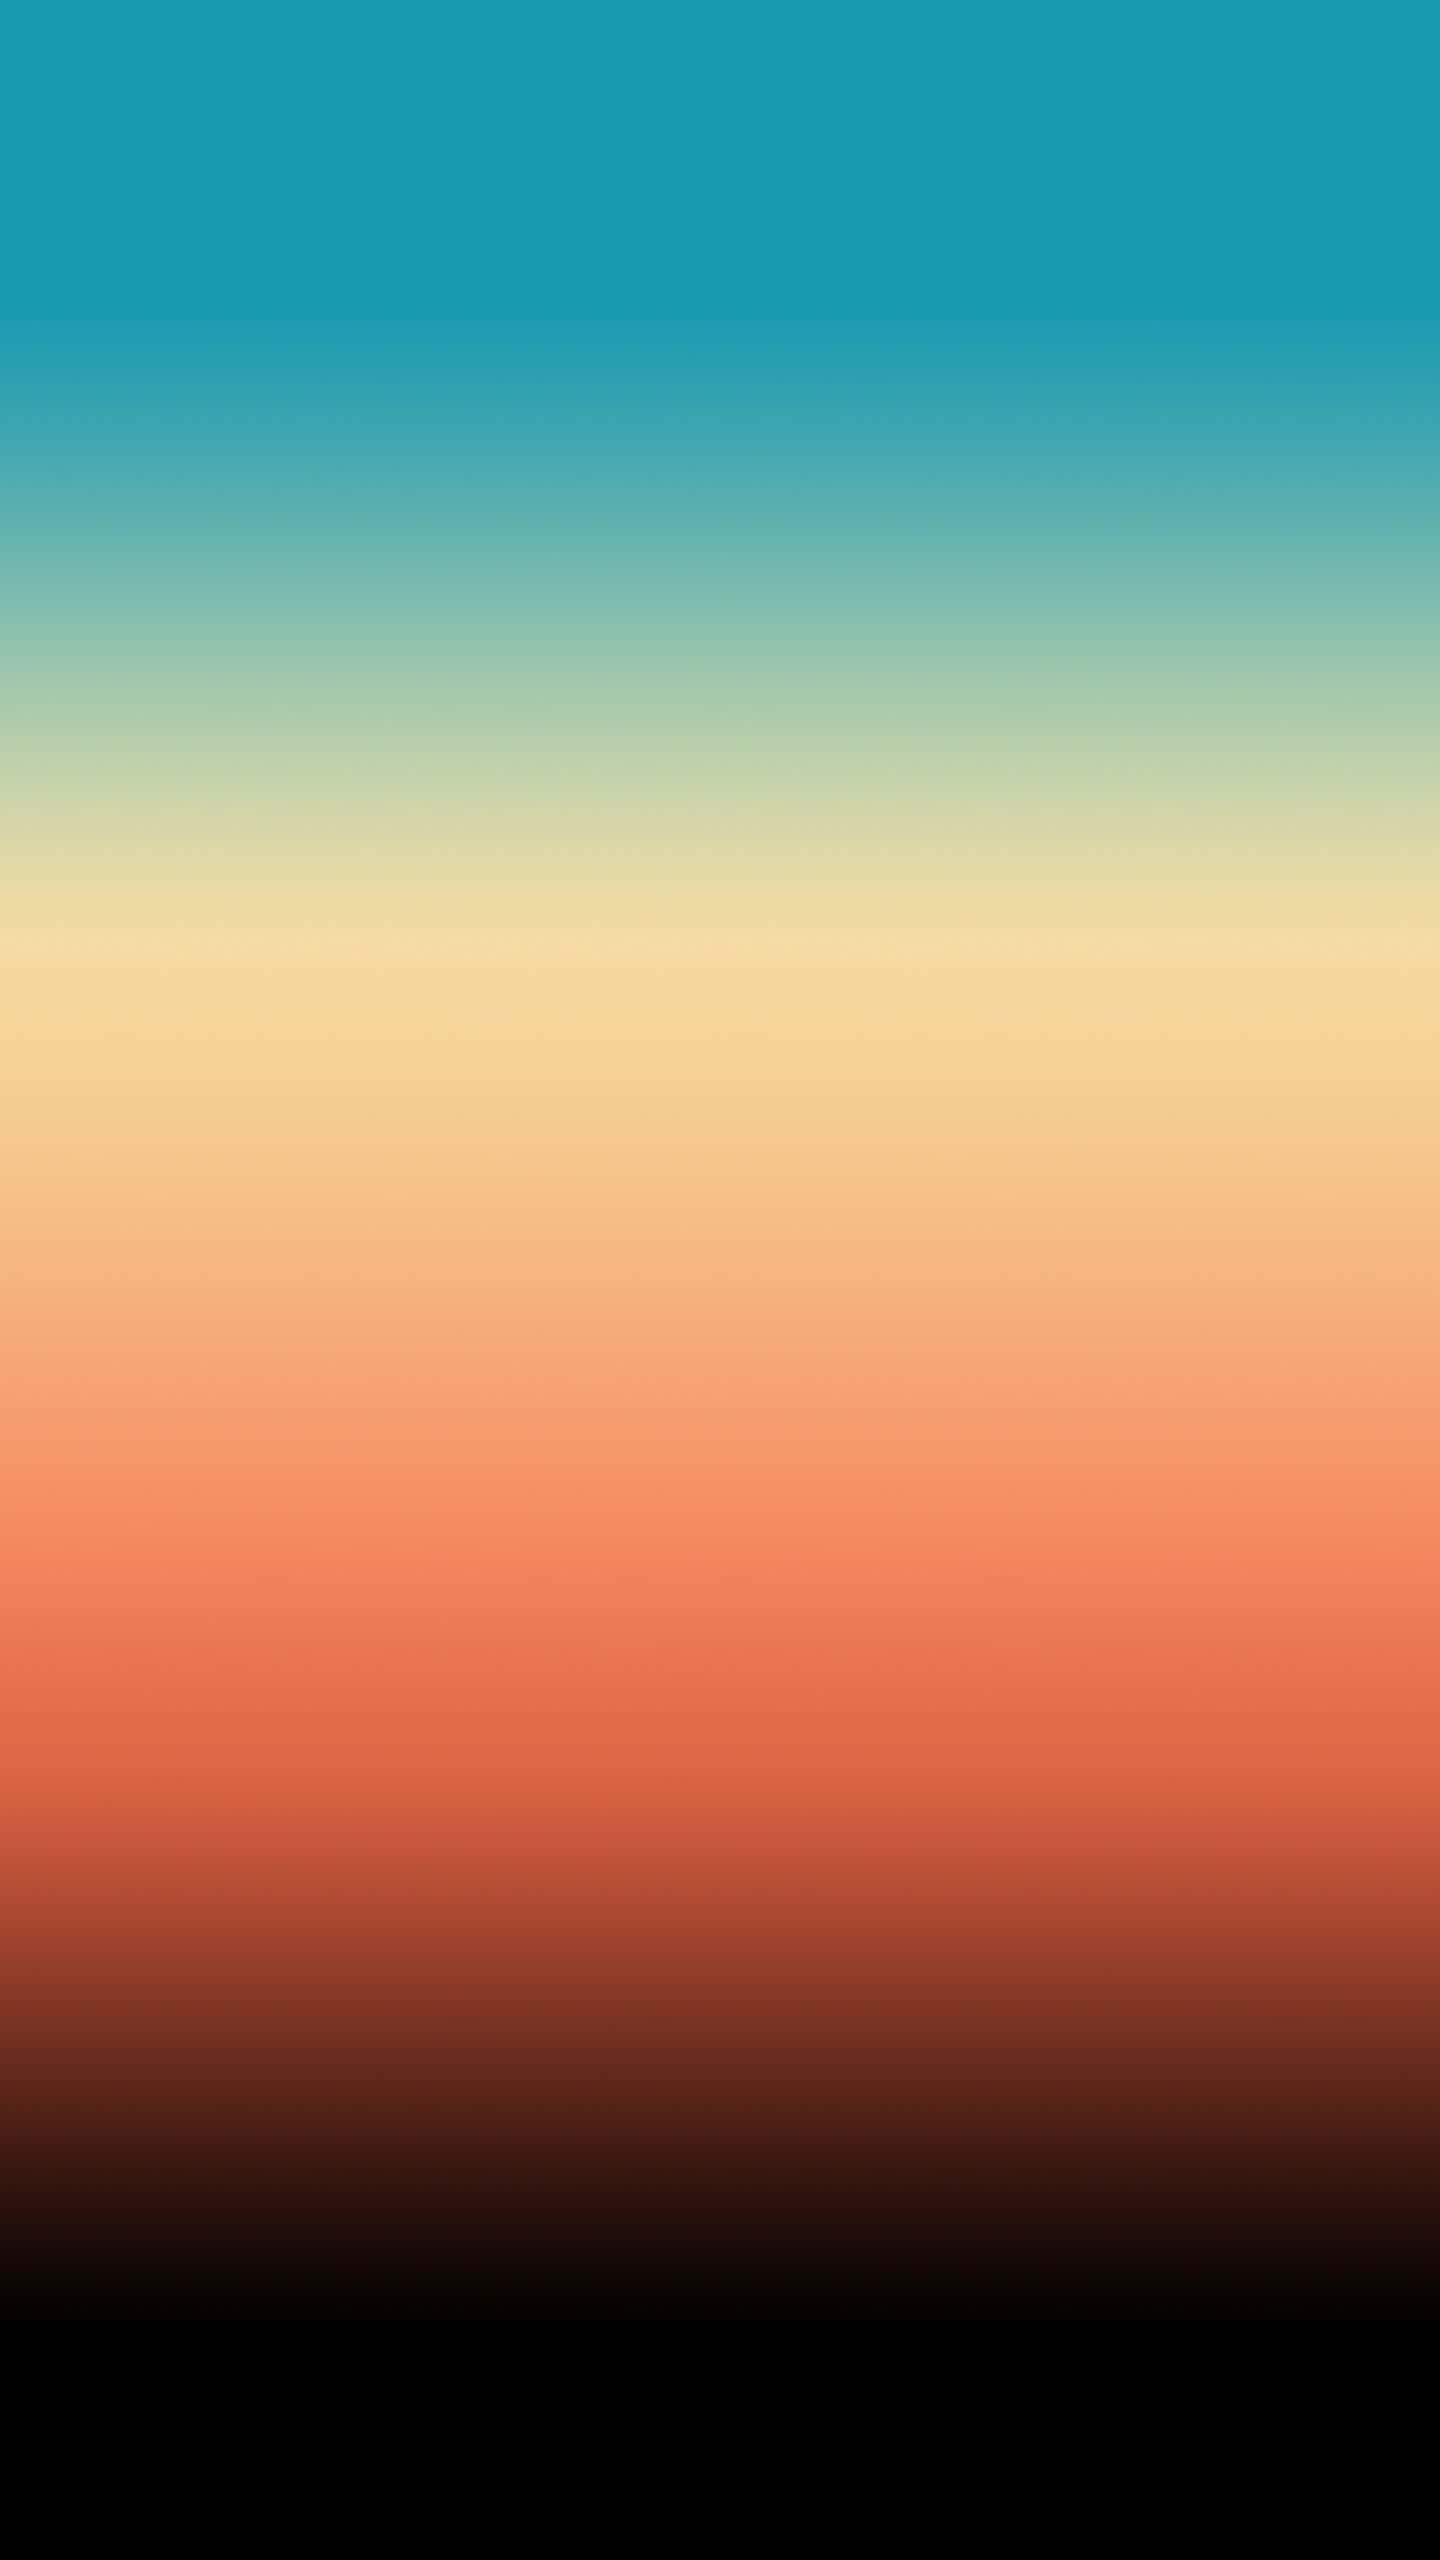 A Colorful Sunset Background With A Blue And Orange Color